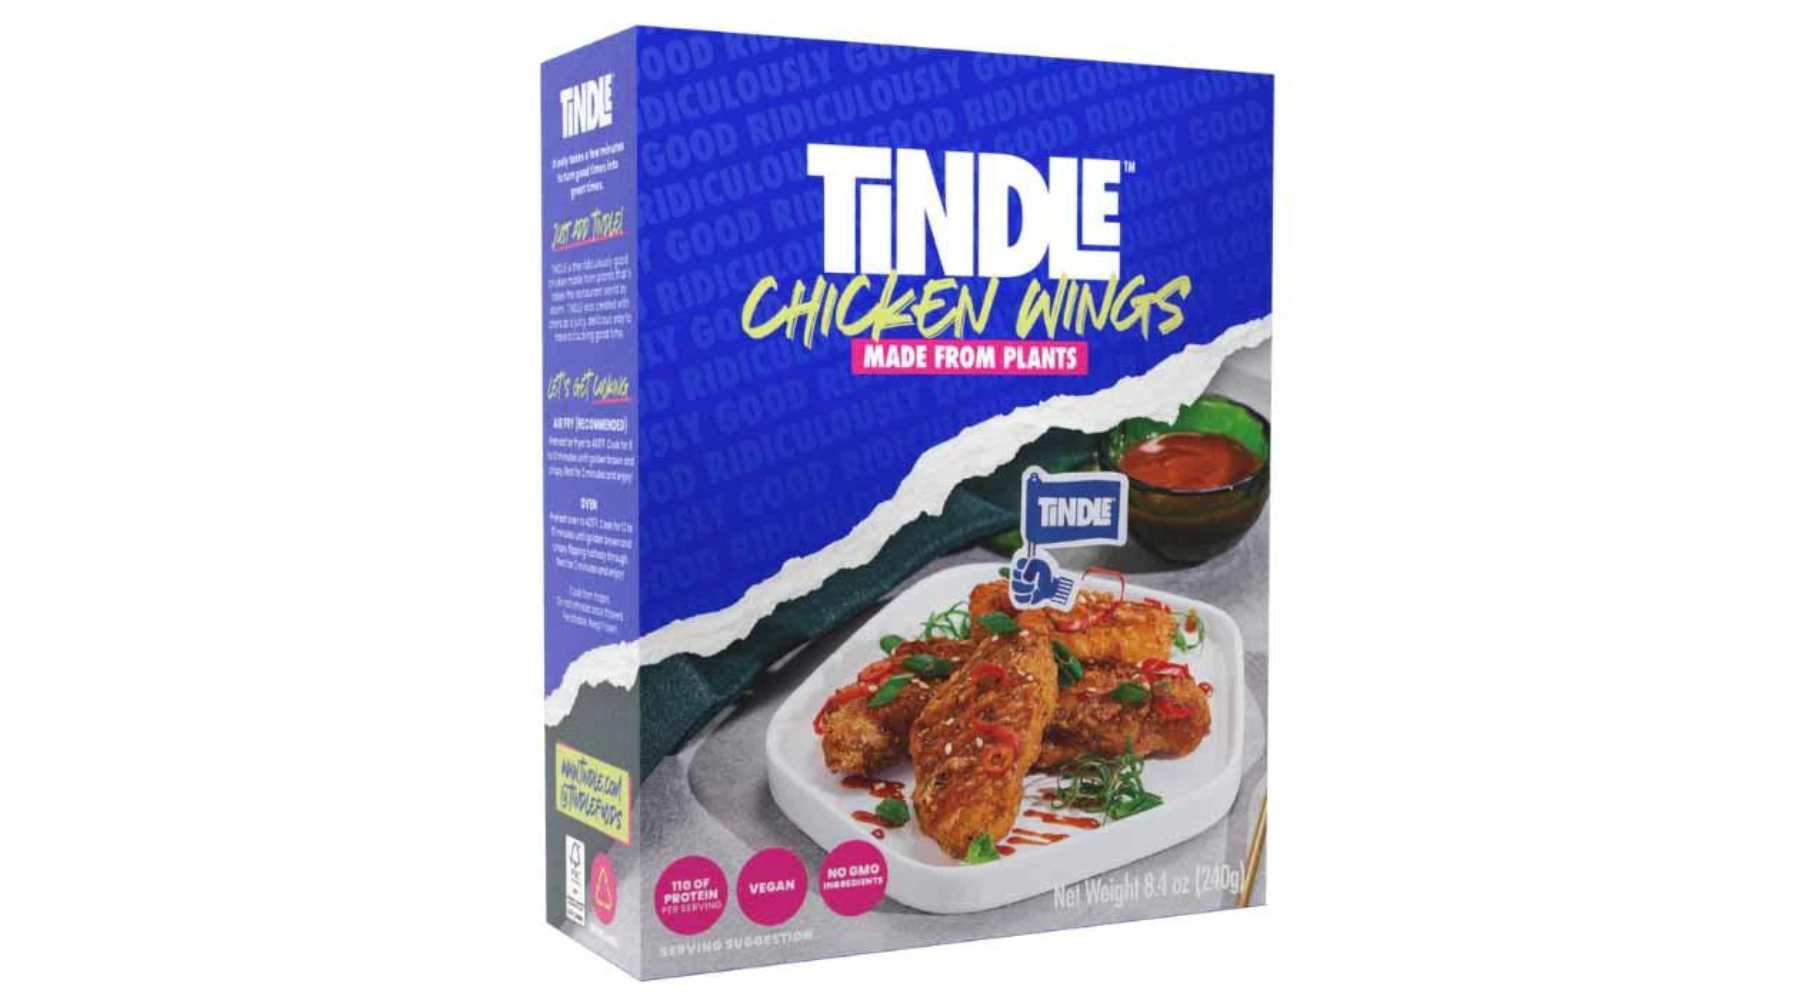 TiNDLE - Chicken Wings, 8.4oz